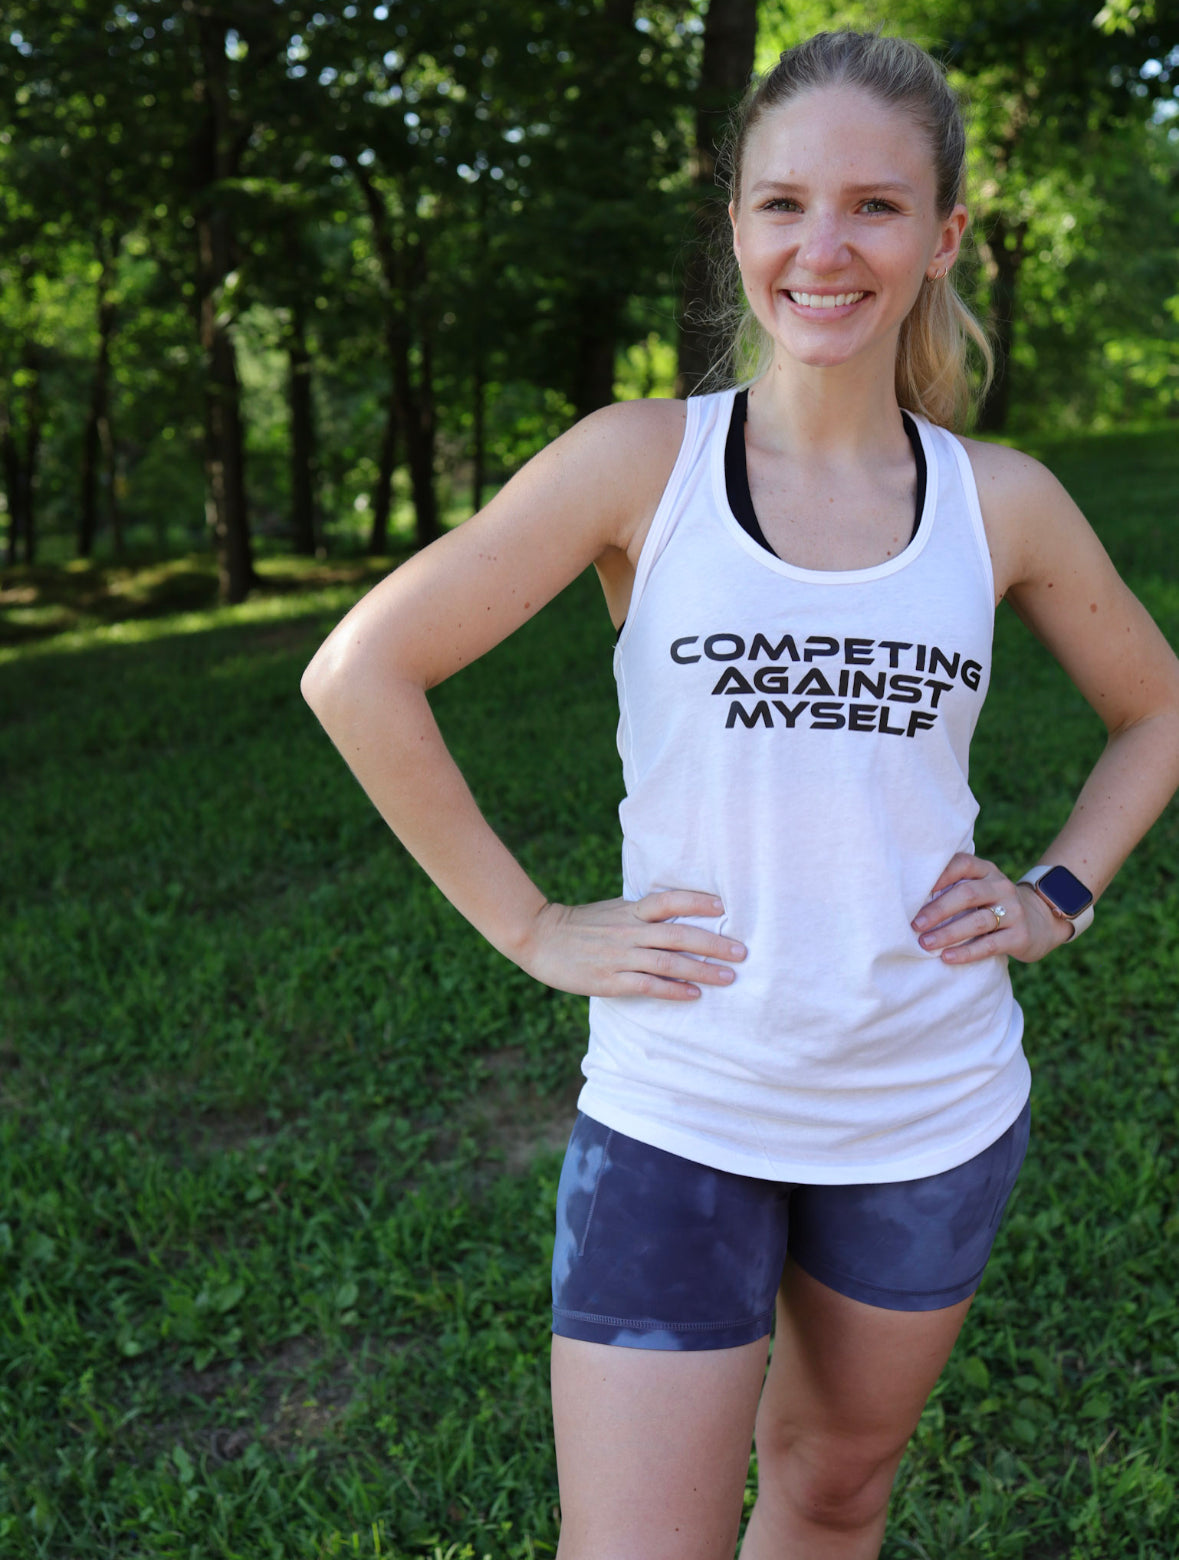 Competing Against Myself | Women’s Tank